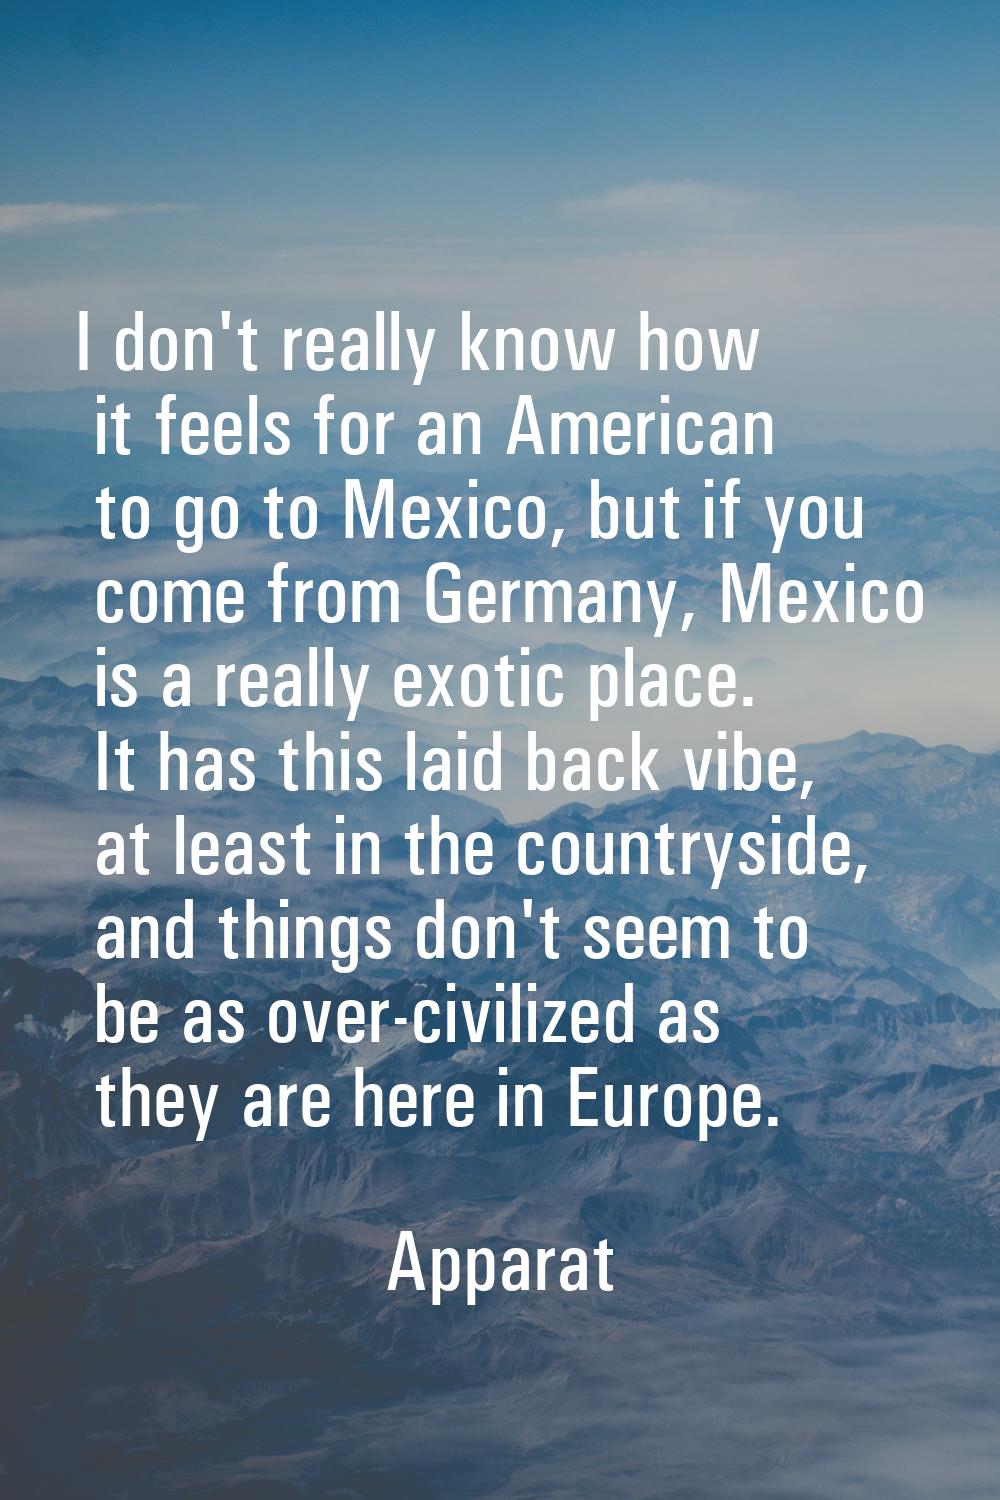 I don't really know how it feels for an American to go to Mexico, but if you come from Germany, Mex